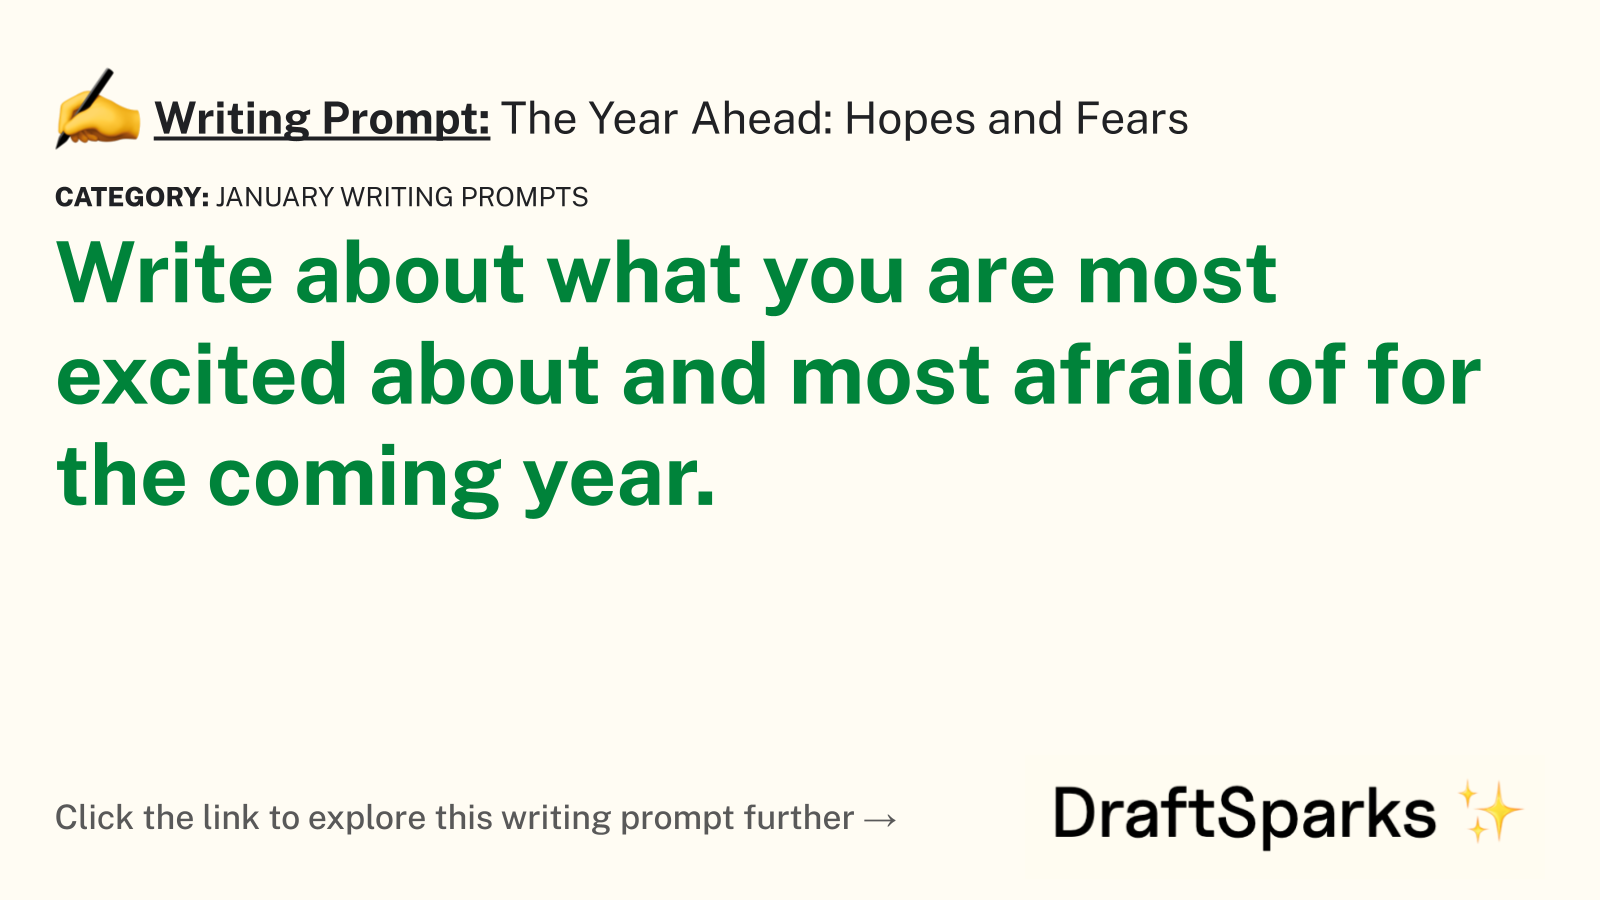 The Year Ahead: Hopes and Fears